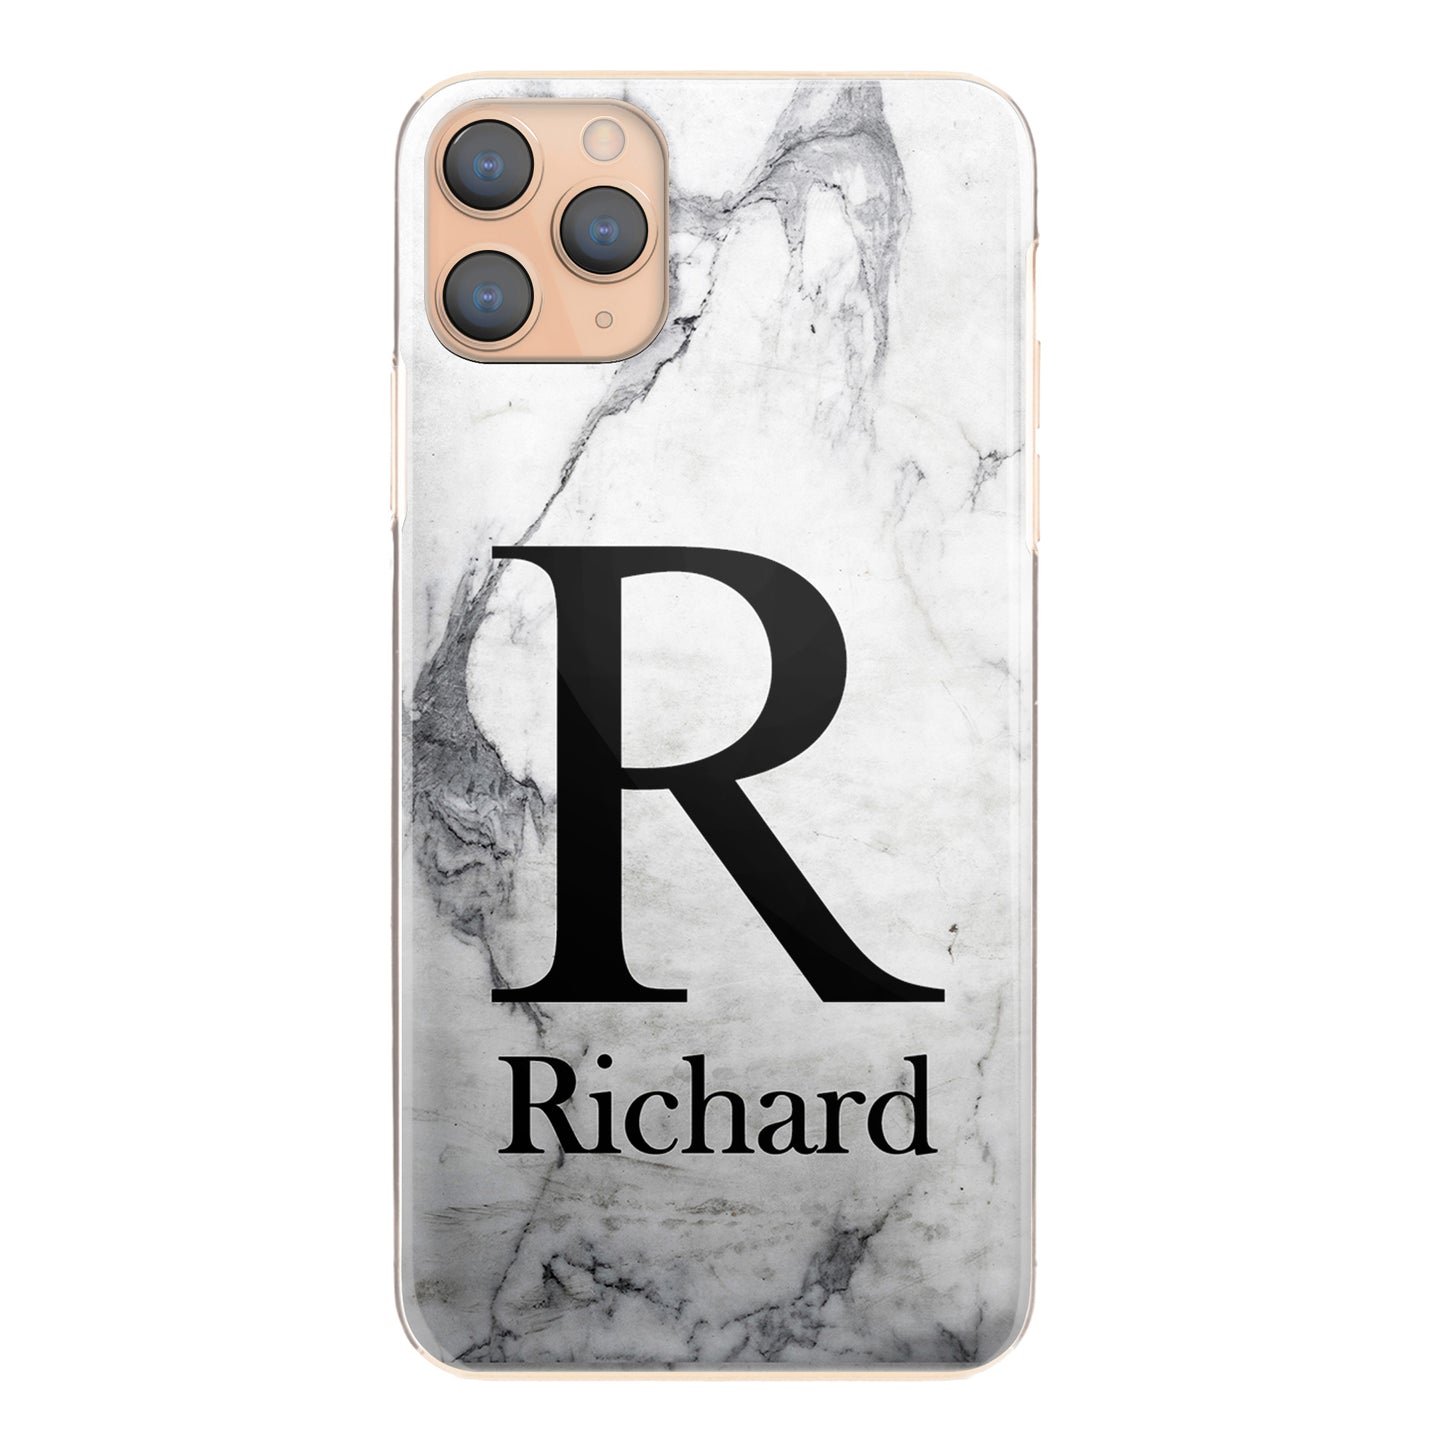 Personalised Samsung Galaxy Phone Hard Case with Traditional Monogram and Text on Grey Marble